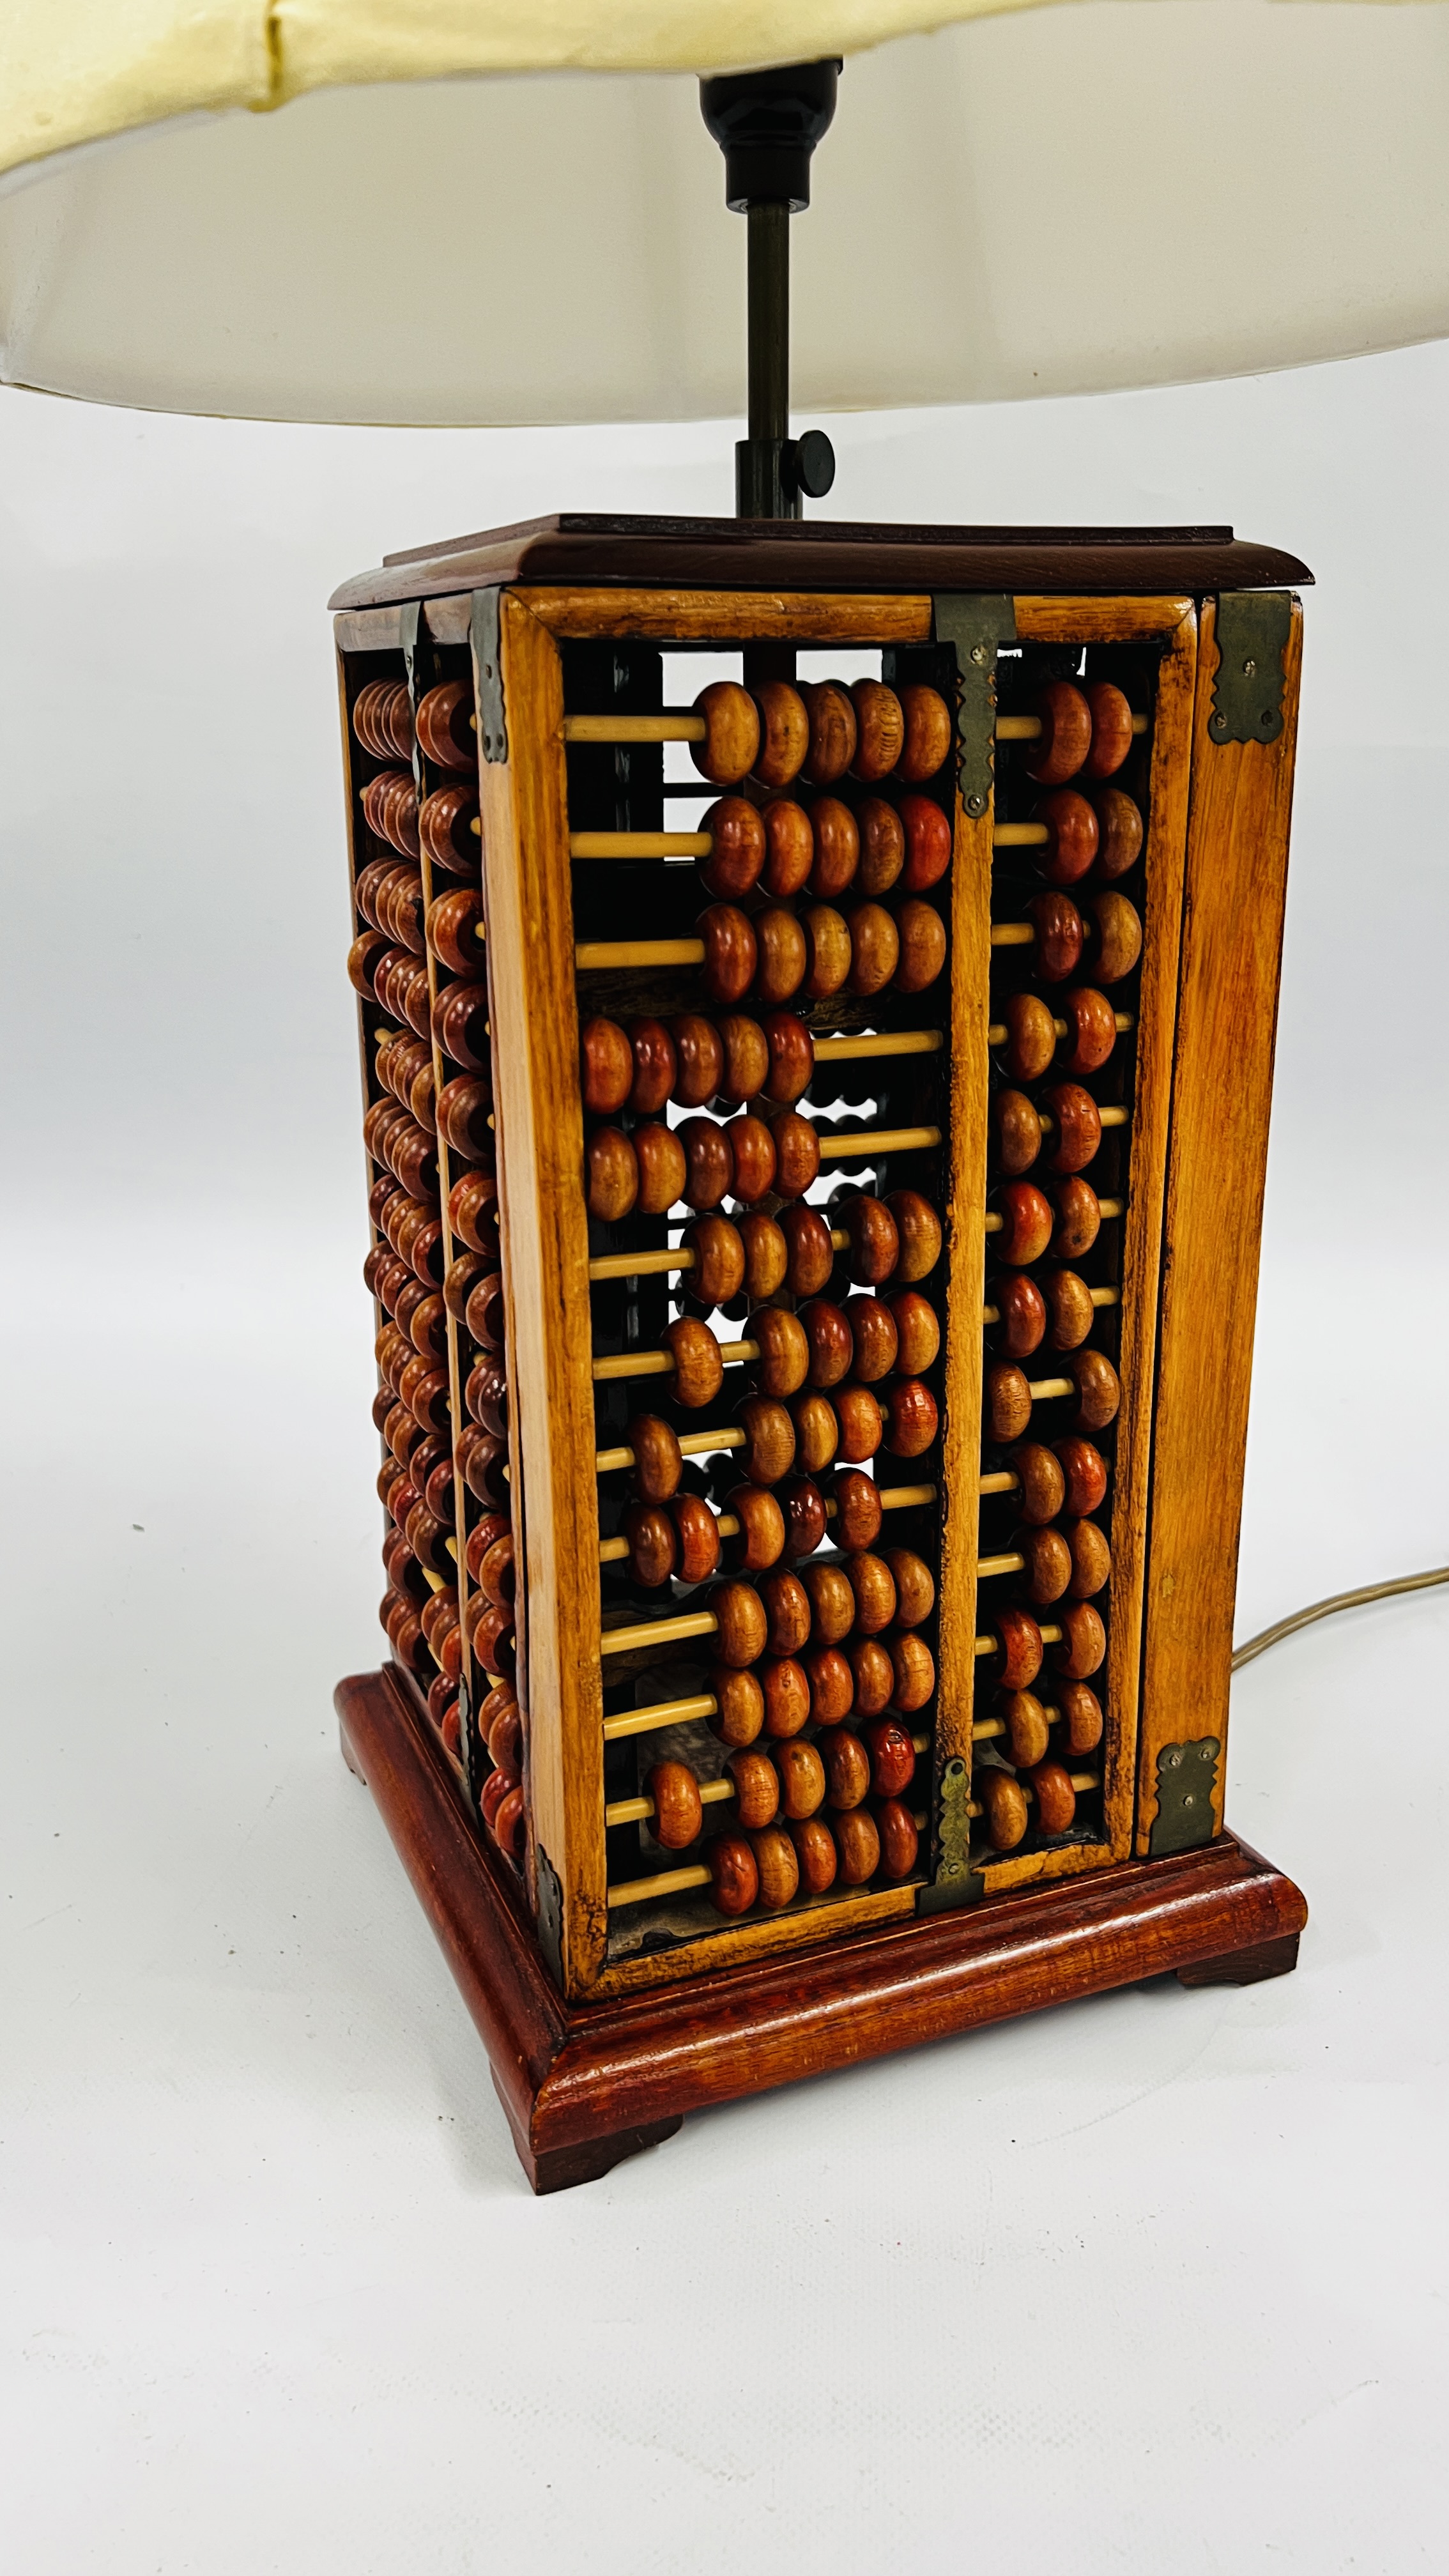 A NOVELTY CONVERTED LAMP FROM 4 ABACUS BOARDS WITH SHADE - WIRE REMOVED - SOLD AS SEEN. - Image 3 of 5